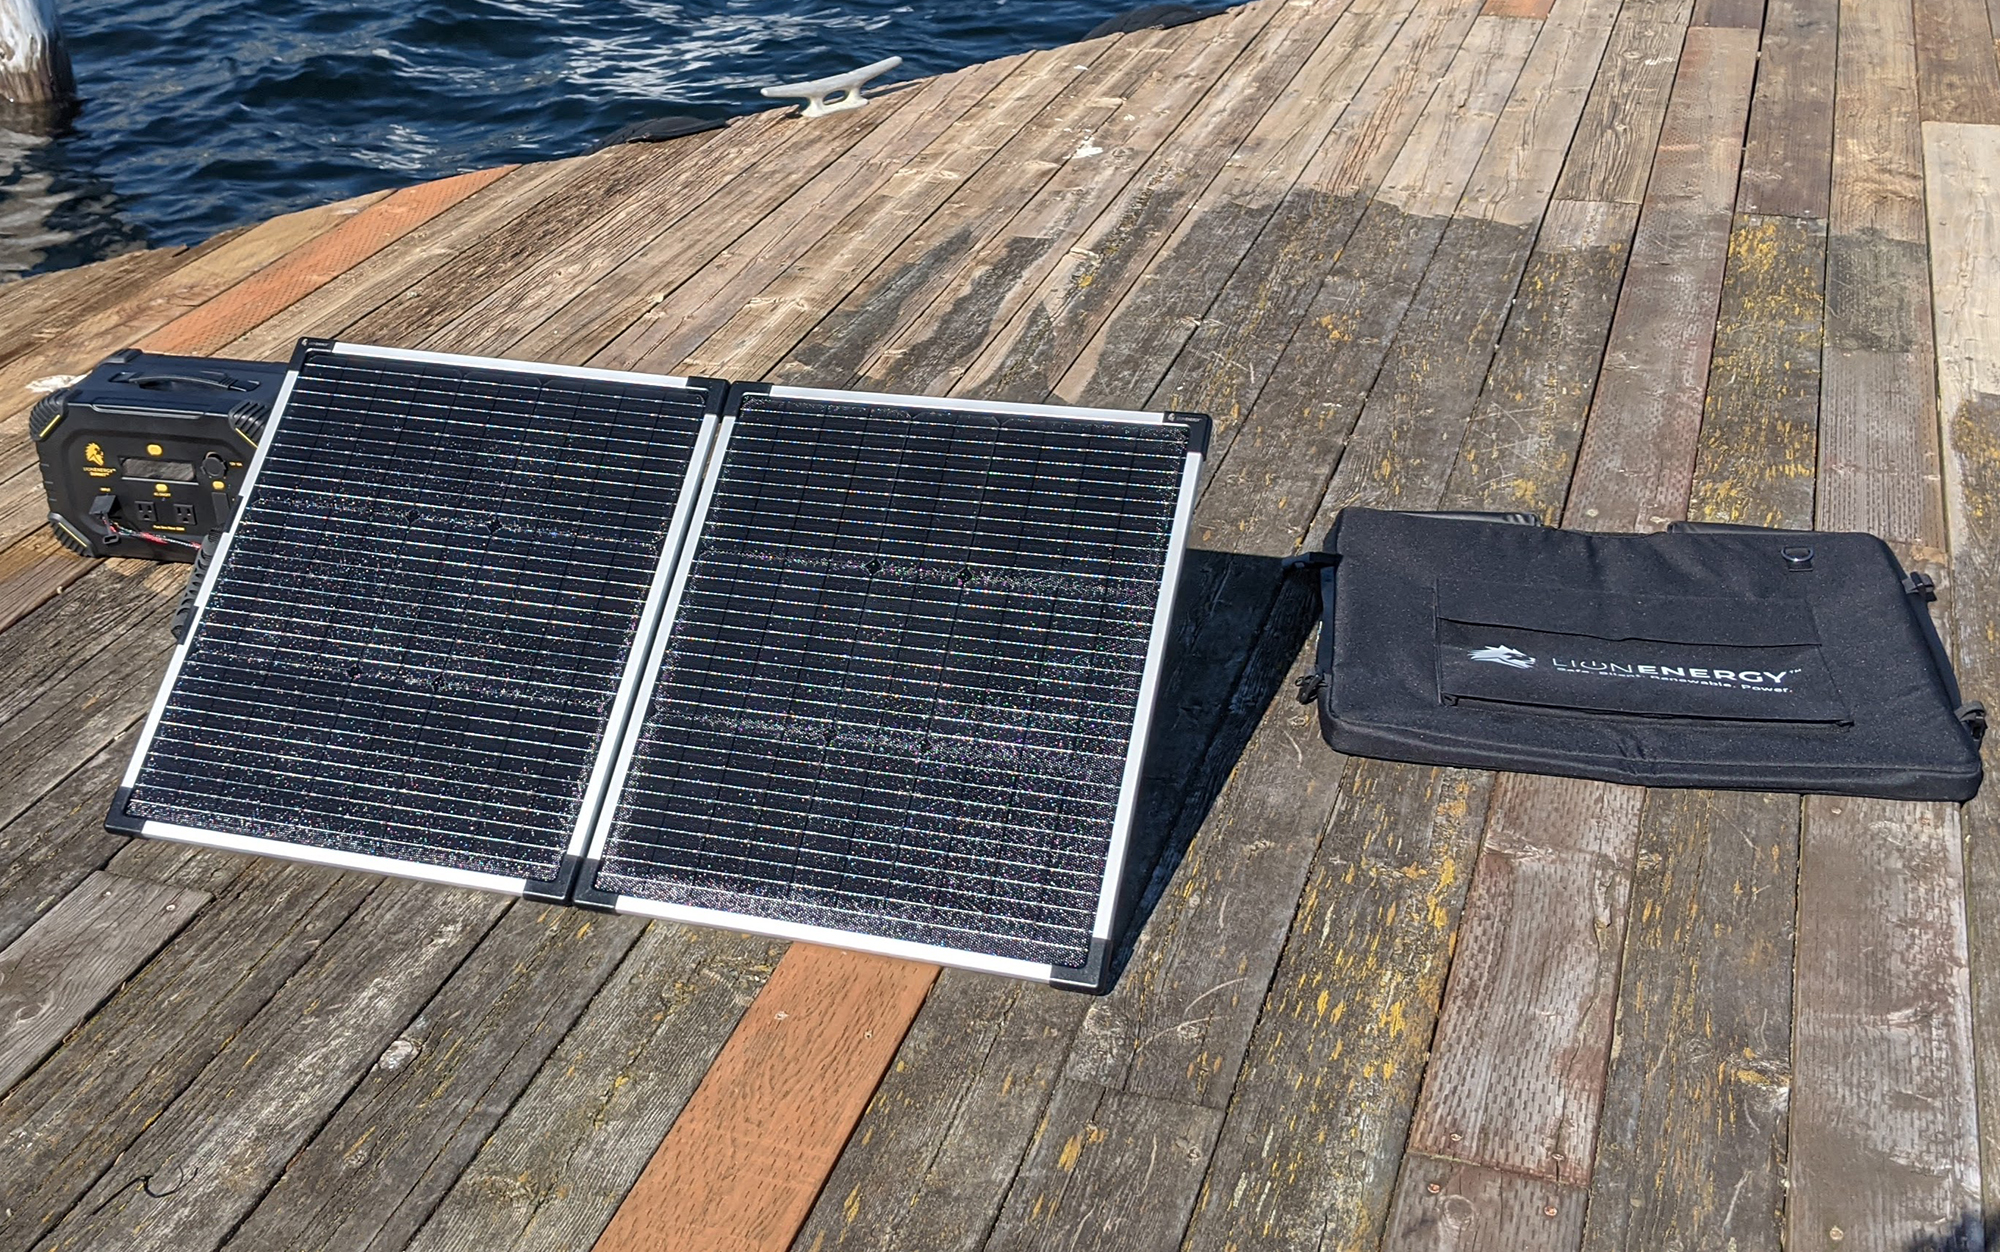 We tested the Lion portable solar panels.